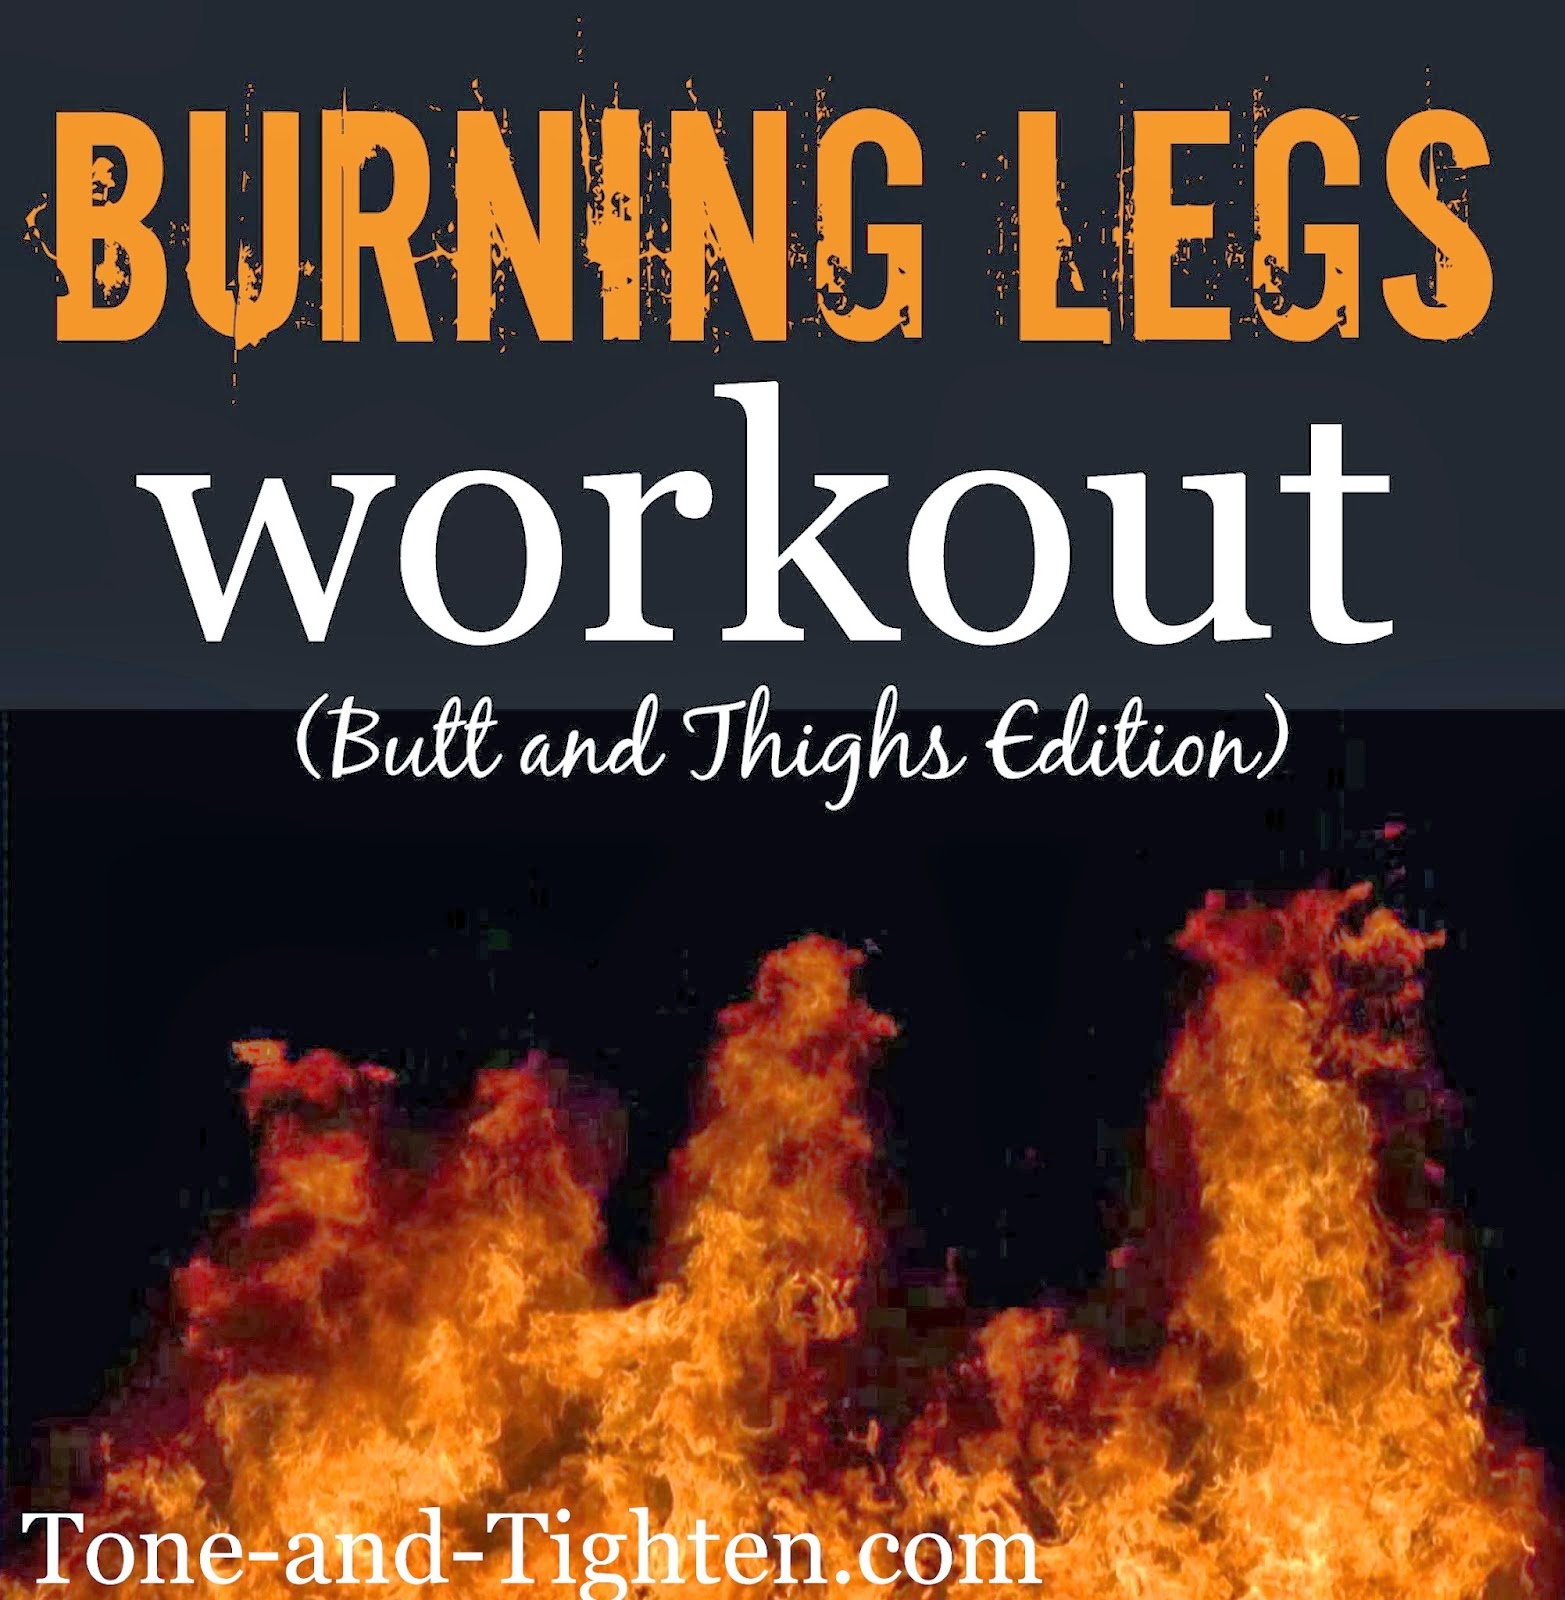 https://tone-and-tighten.com/2014/01/video-workout-burning-legs-workout-butt-and-thighs-edition.html